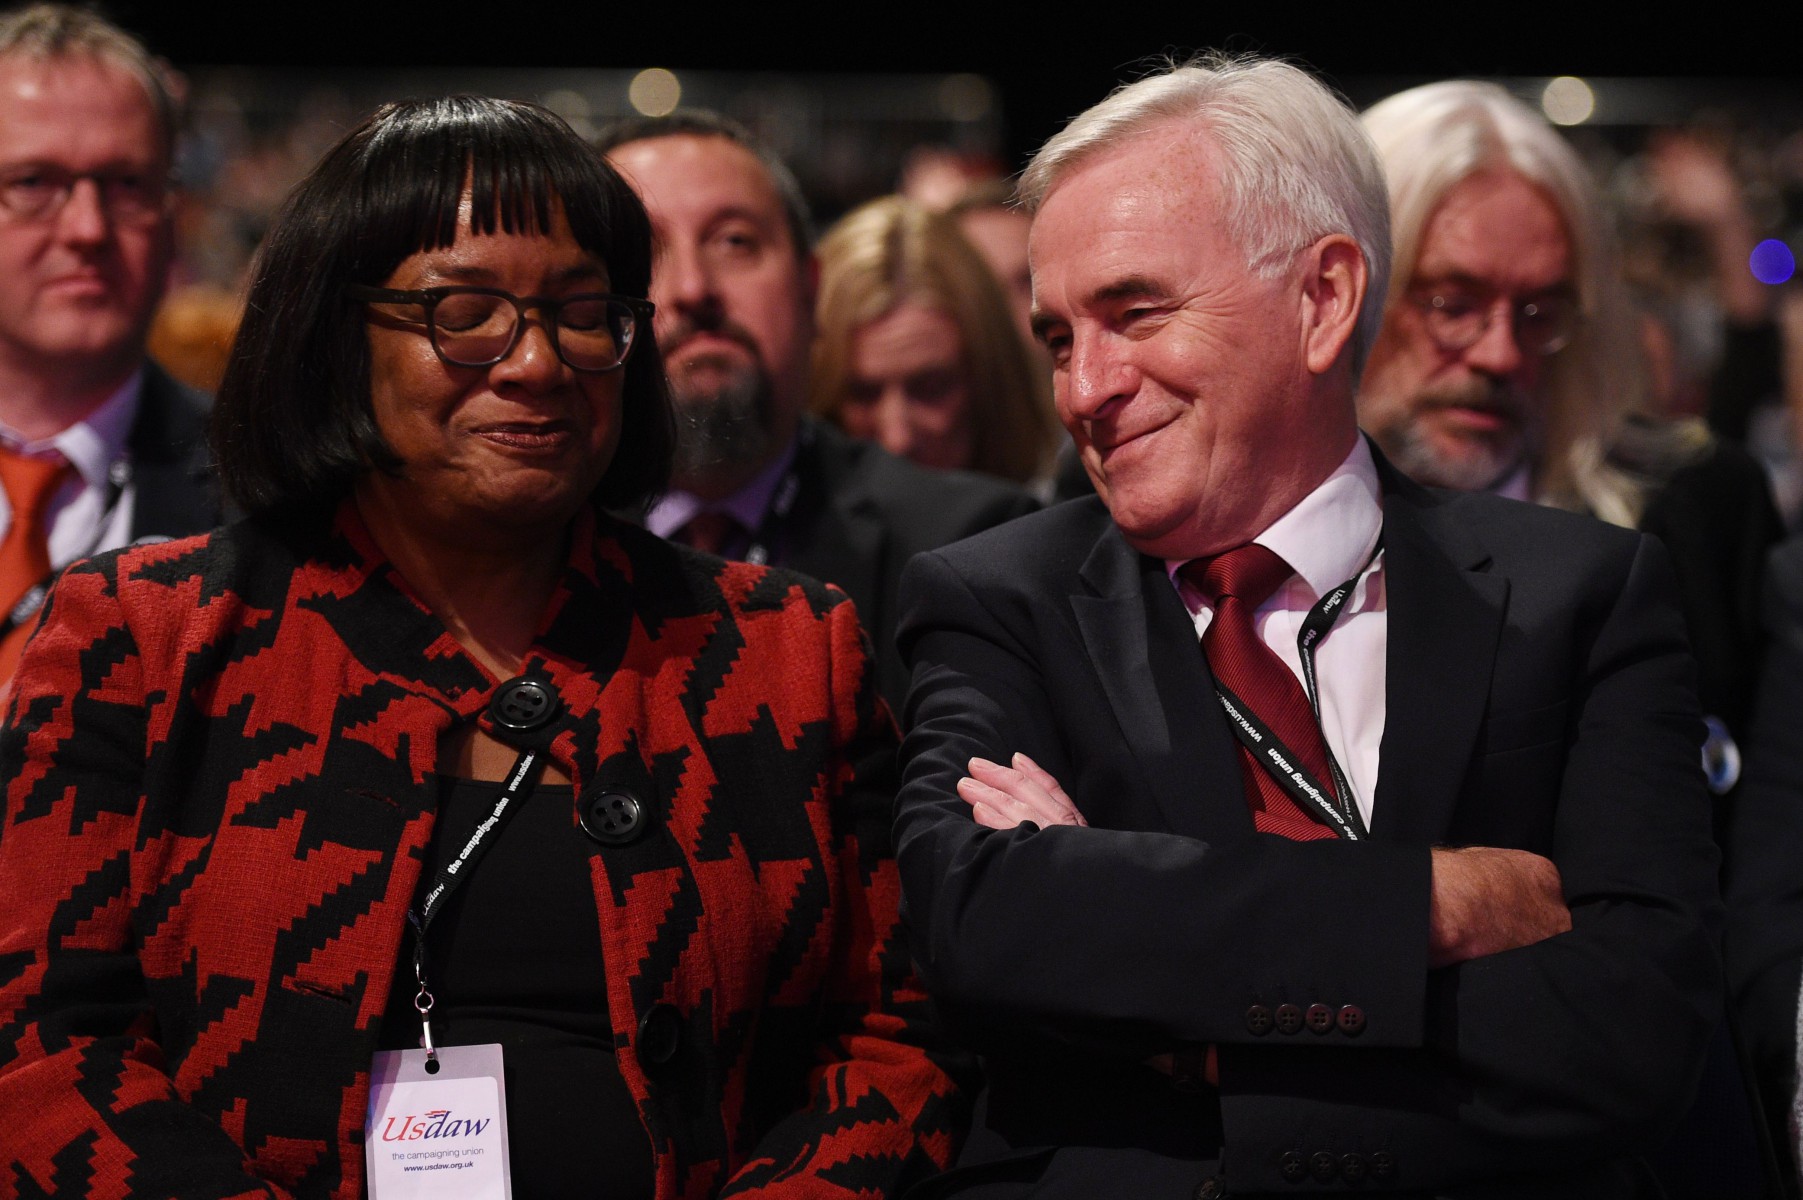 Diane Abbott and John McDonnell demanded the closure of MI5